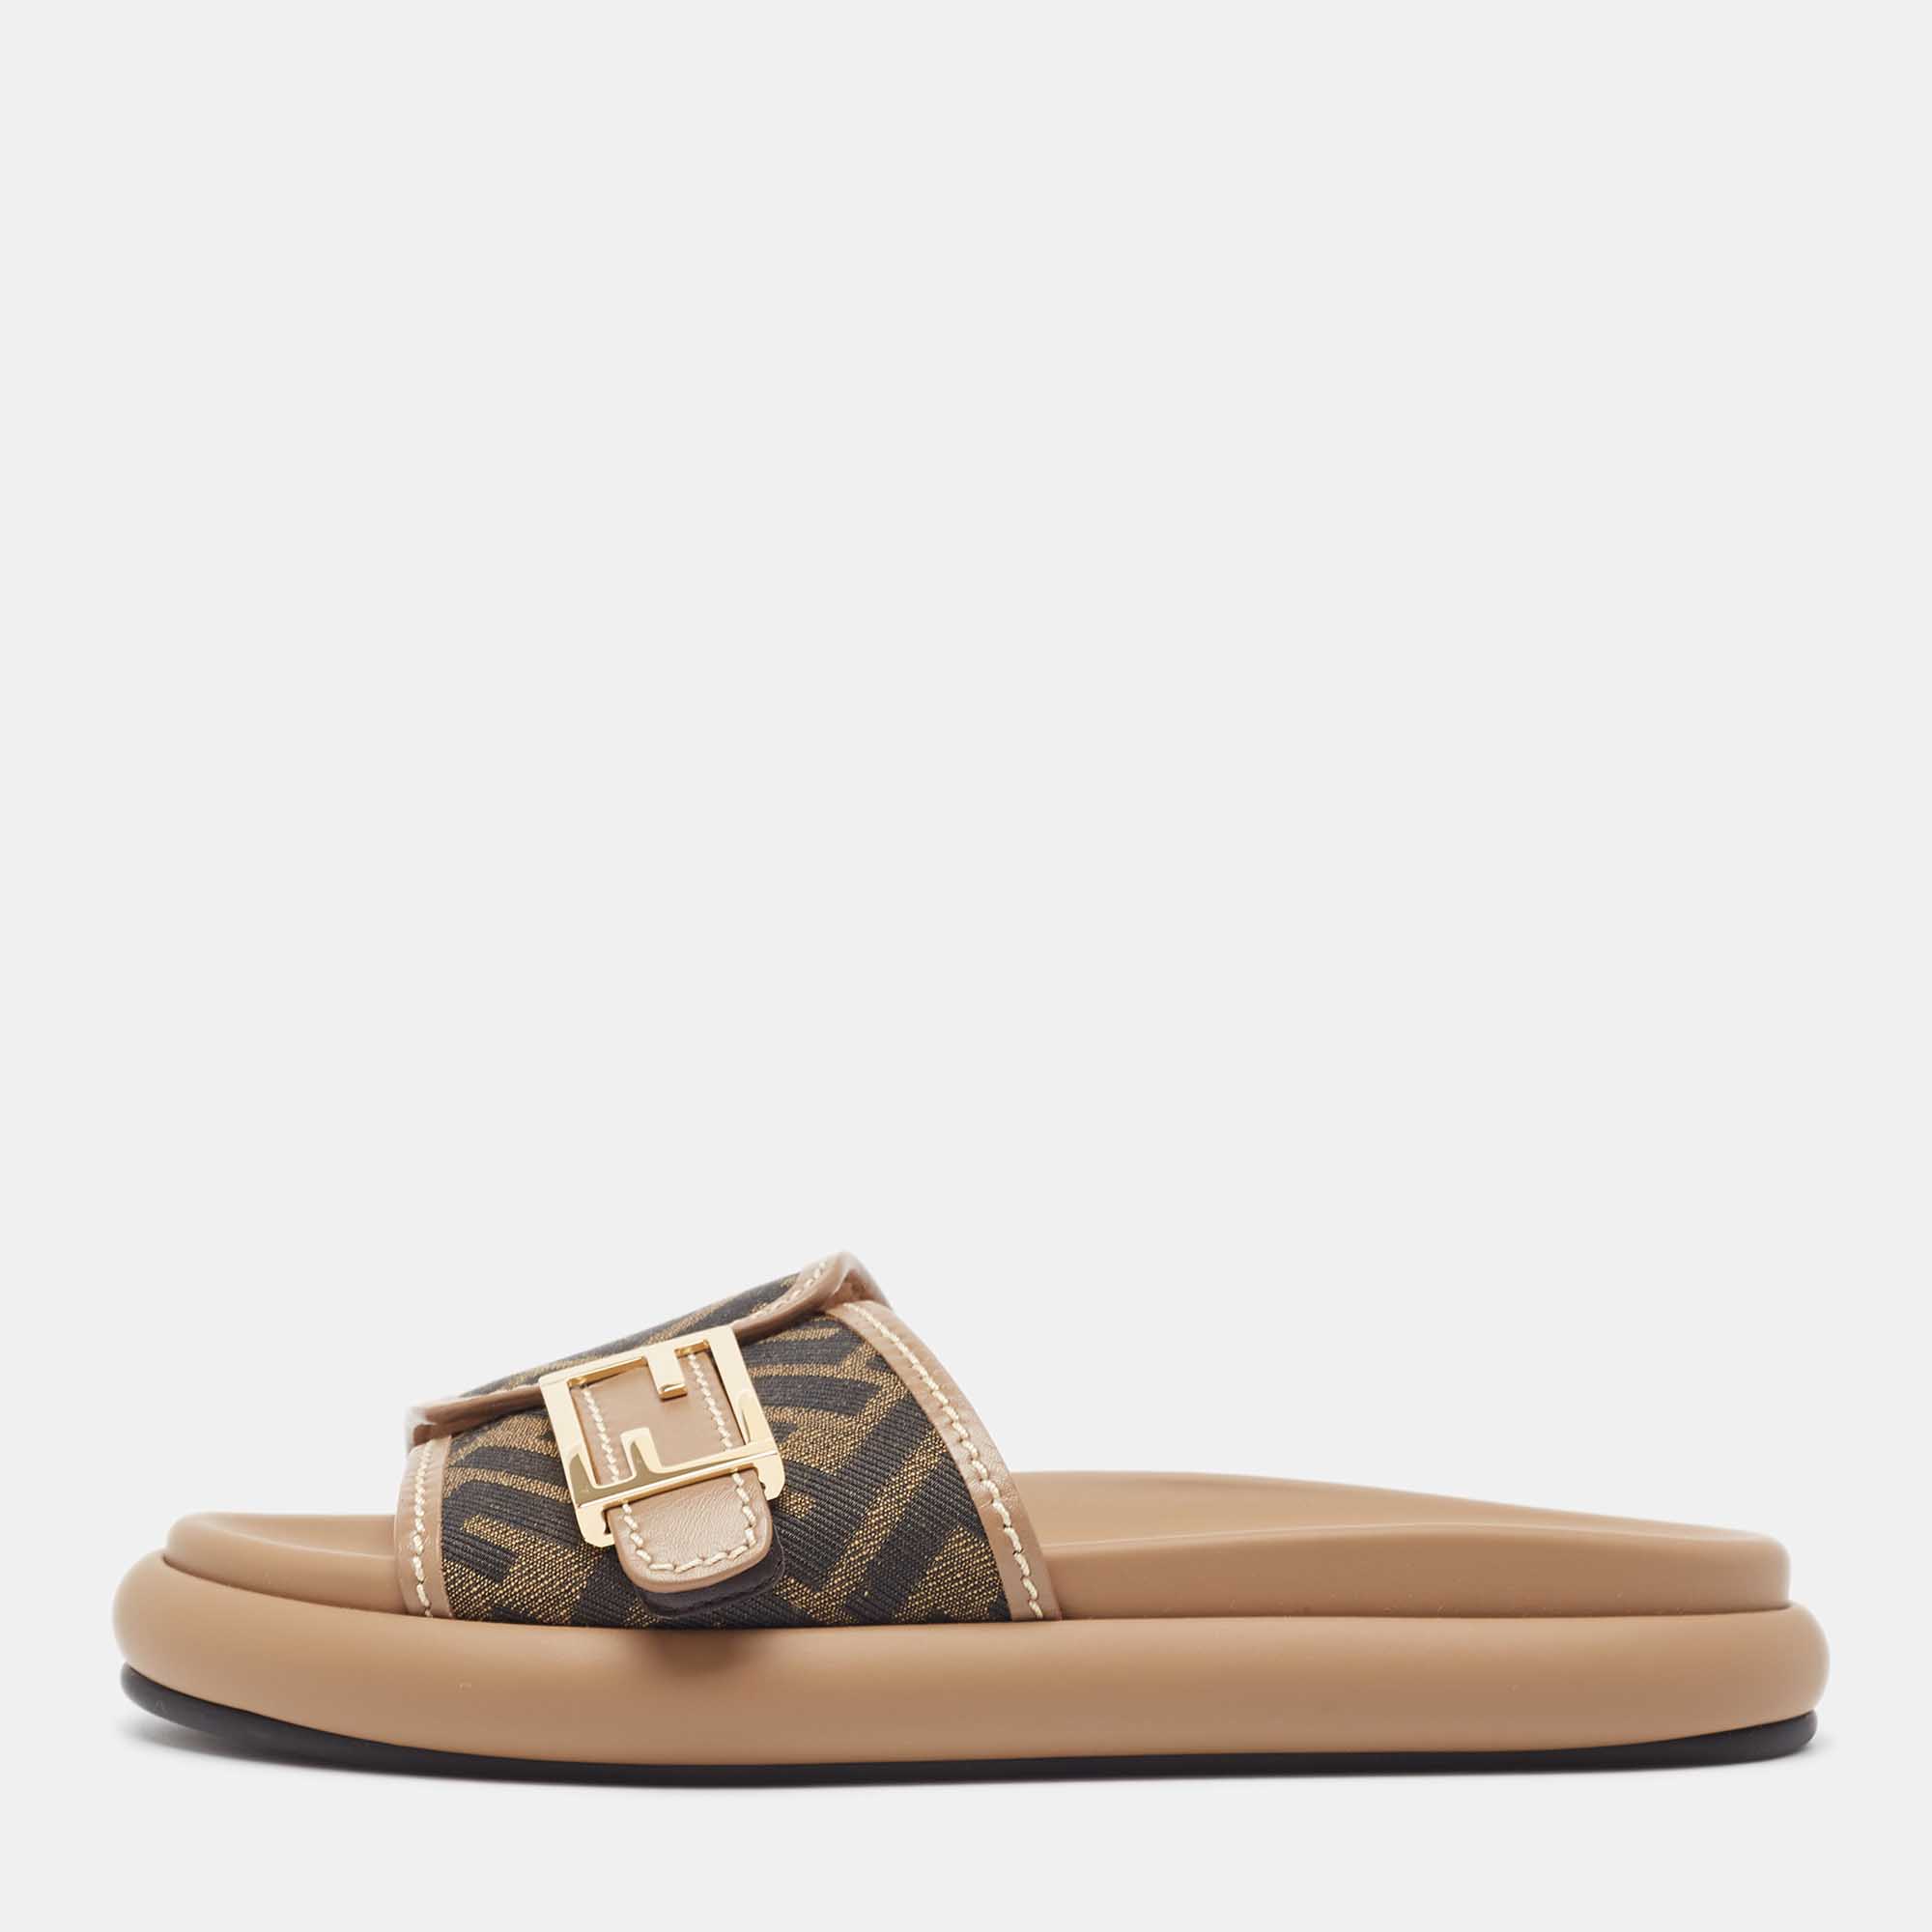 Pre-owned Fendi Brown Zucca Canvas Ff Buckle Slides Size 36